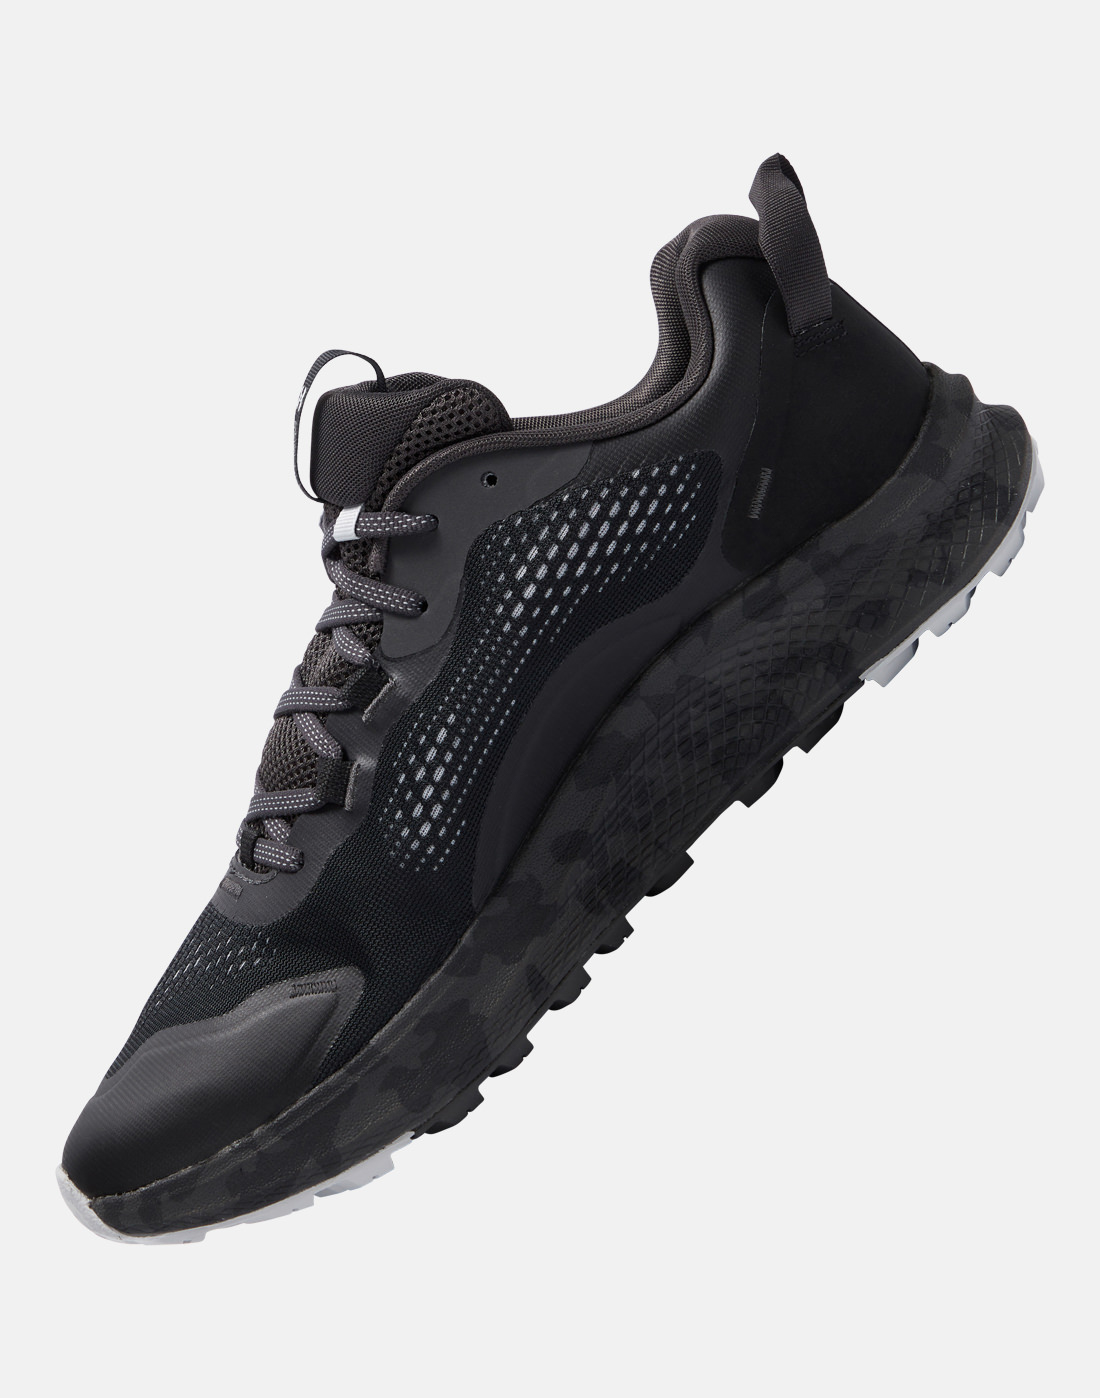 Under Armour Mens Charged Bandit TR 2 - Black | Life Style Sports IE